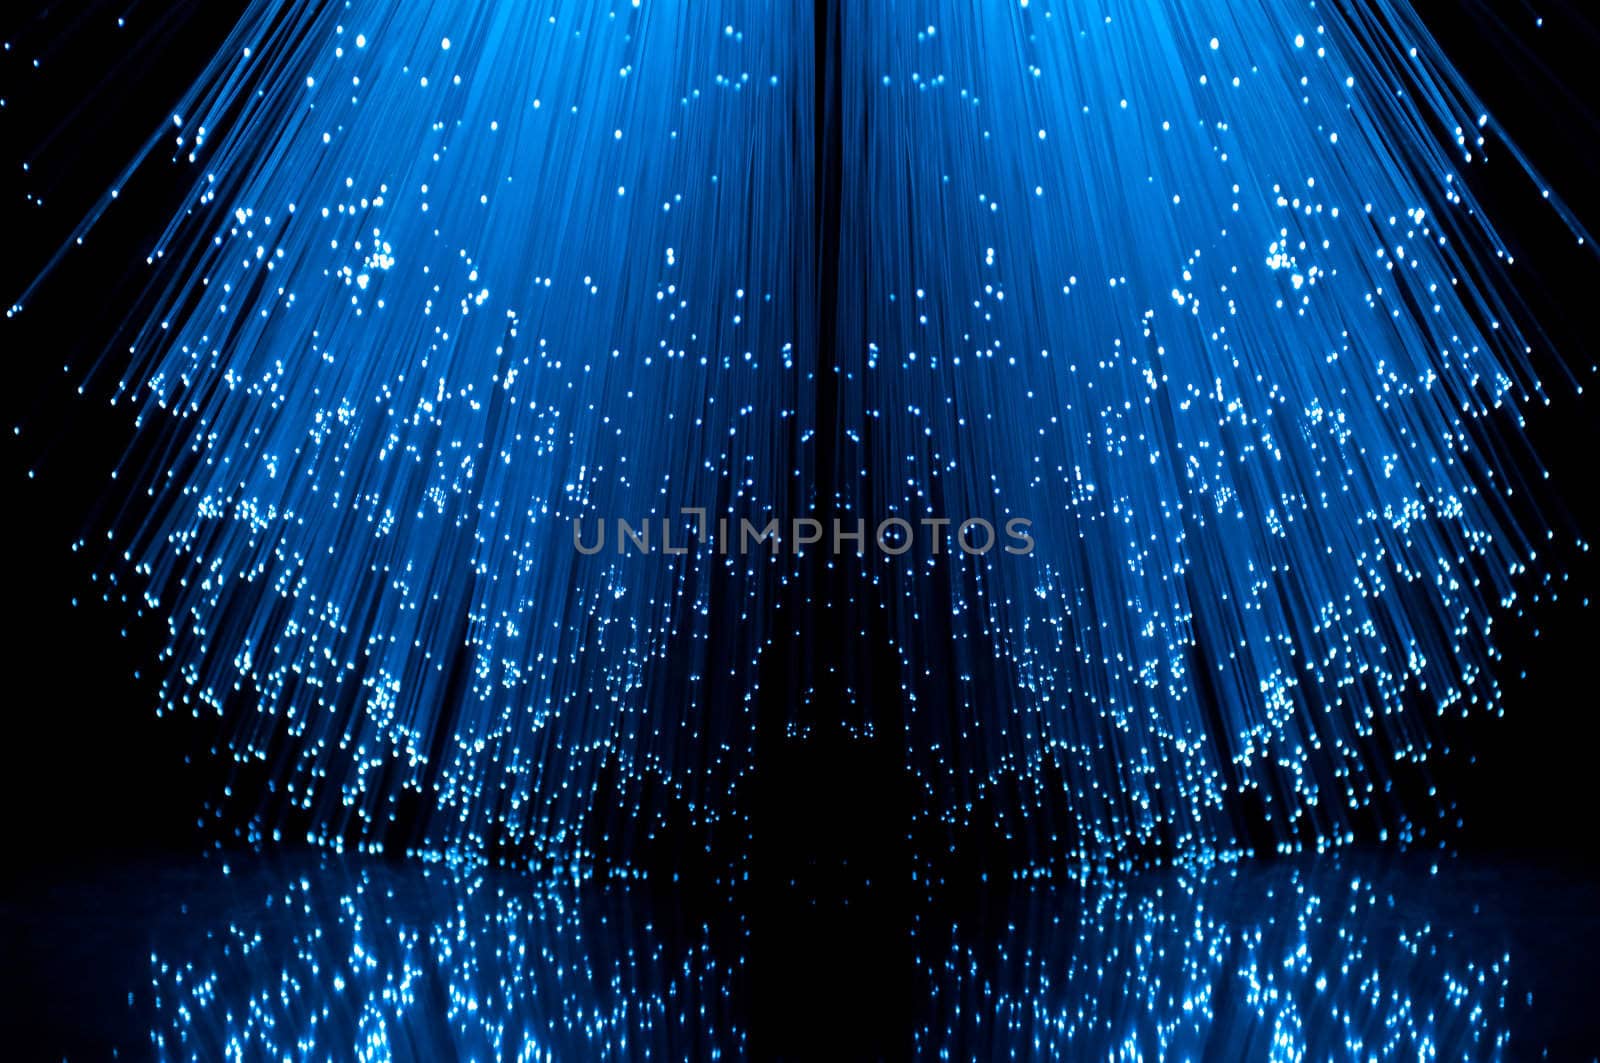 Low level angle capturing the ends of many illuminated blue fibre optic light strands against a black background in reflecting into the foreground.